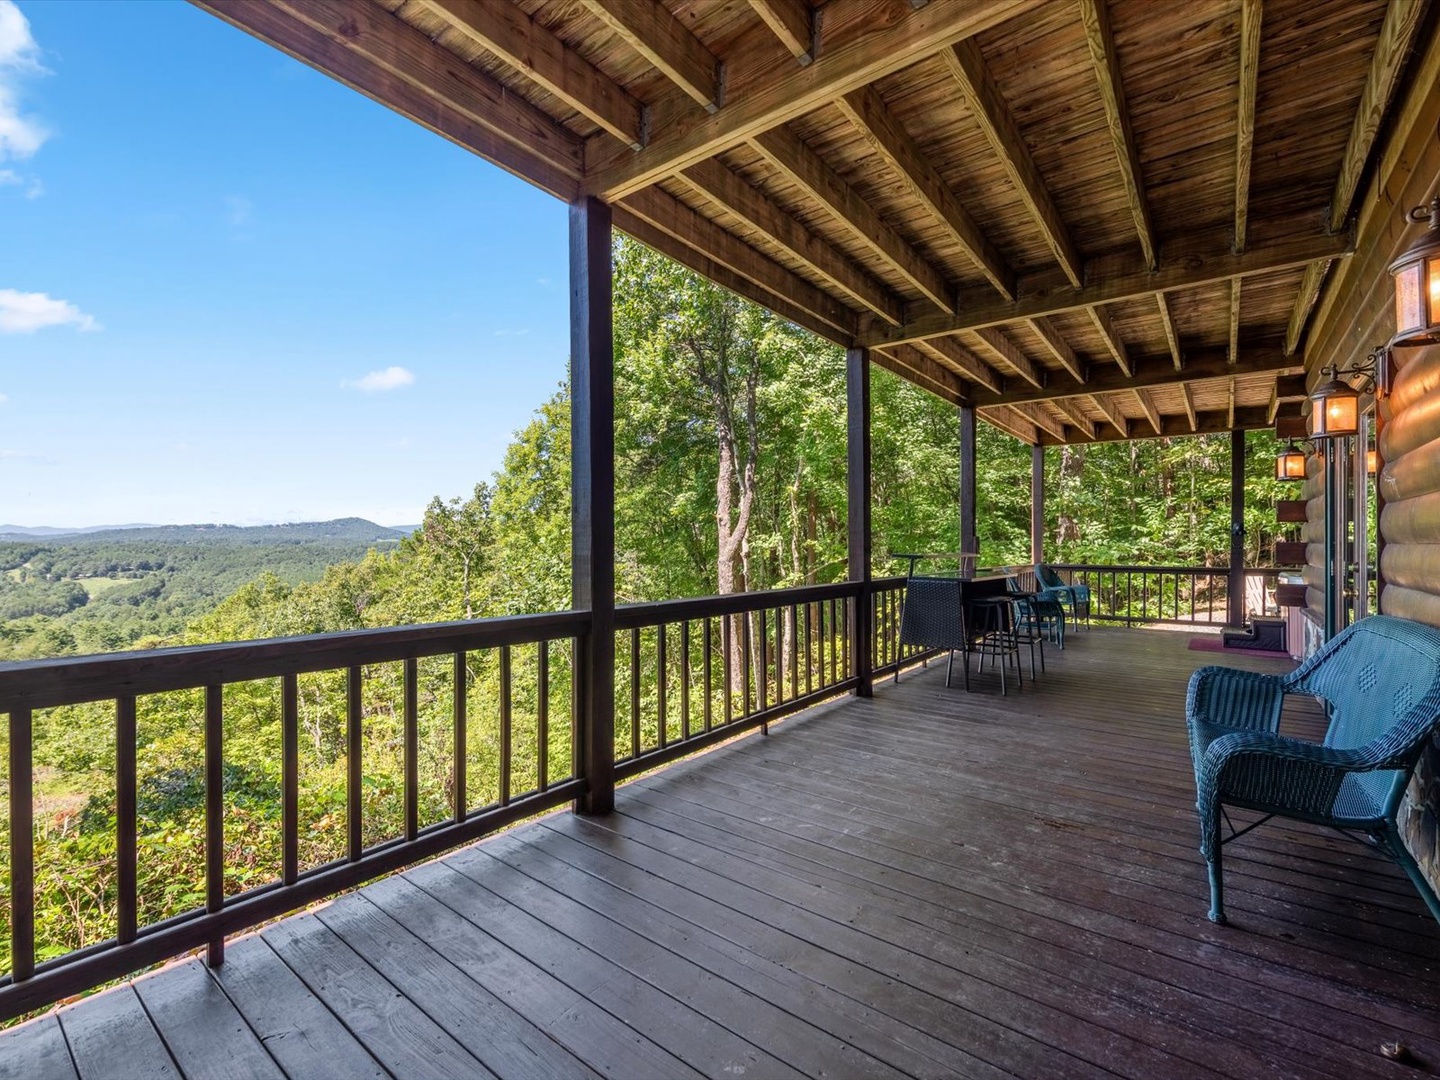 Bear Necessities- Lower level deck with outdoor seating